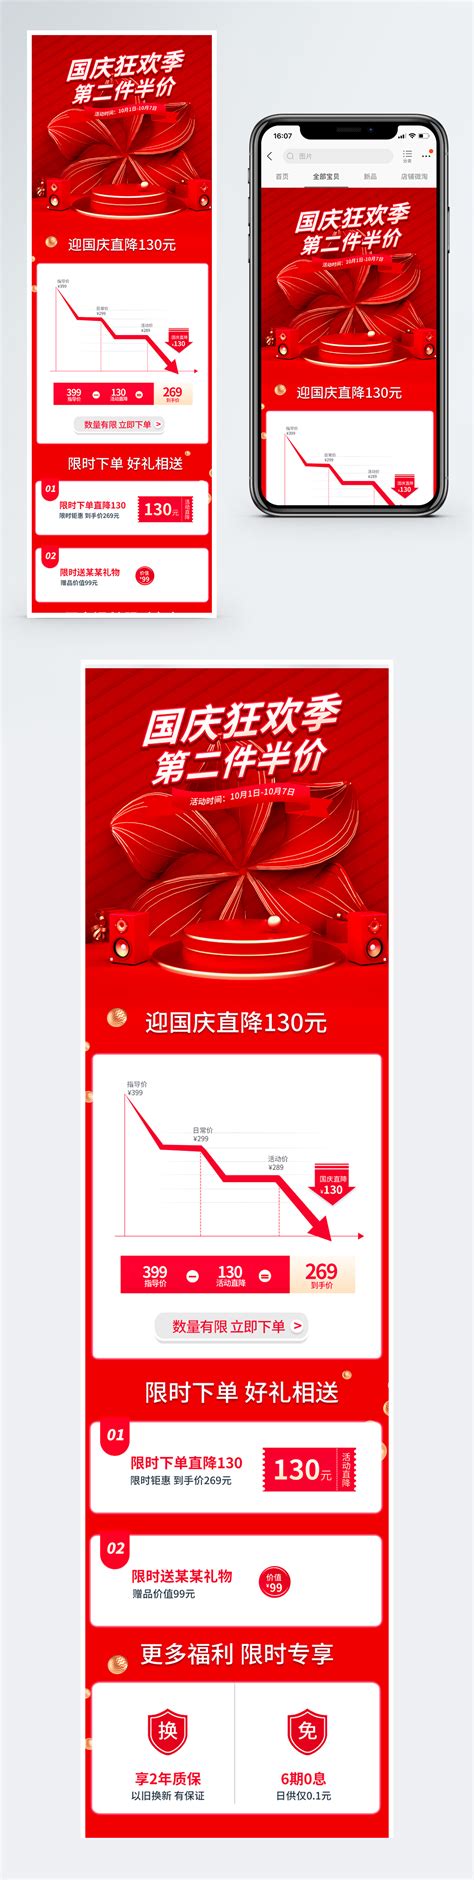 National day promotional price reduction curve association diagram mobile template template ...